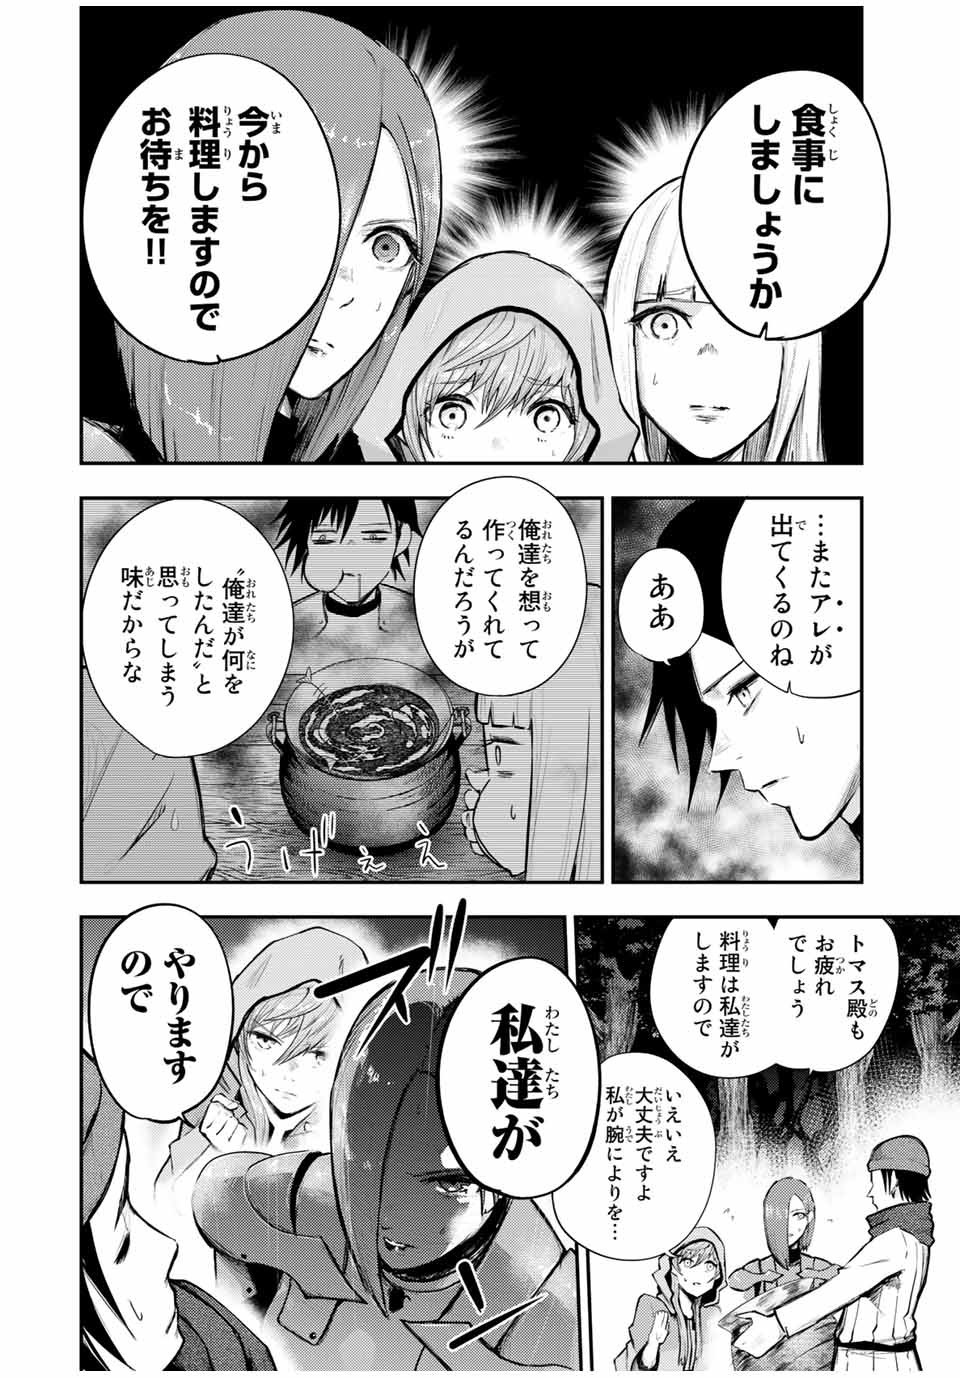 the strongest former prince-; 奴隷転生 ～その奴隷、最強の元王子につき～ 第27話 - Page 2